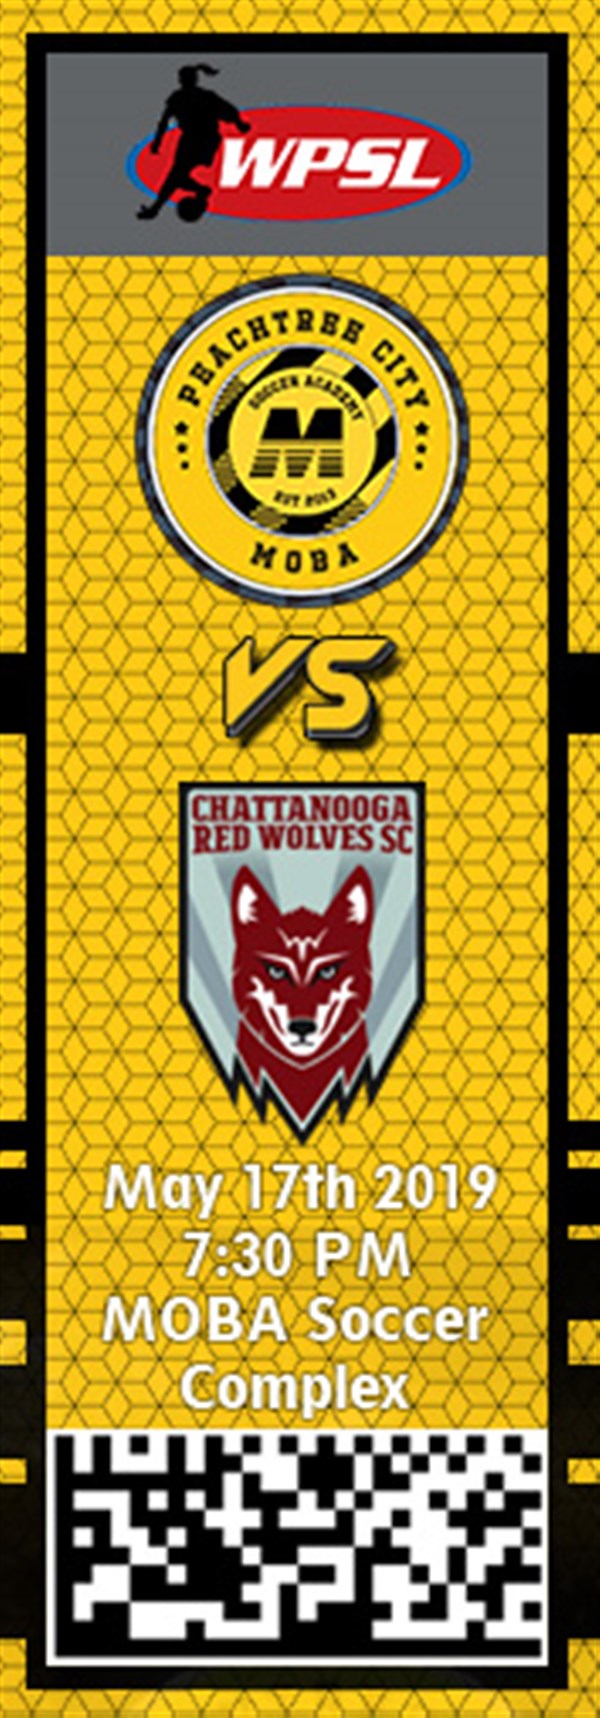 Get Information and buy tickets to PTC MOBA vs. Chattanooga Red Wolves WPSL on MOBA Soccer Academy